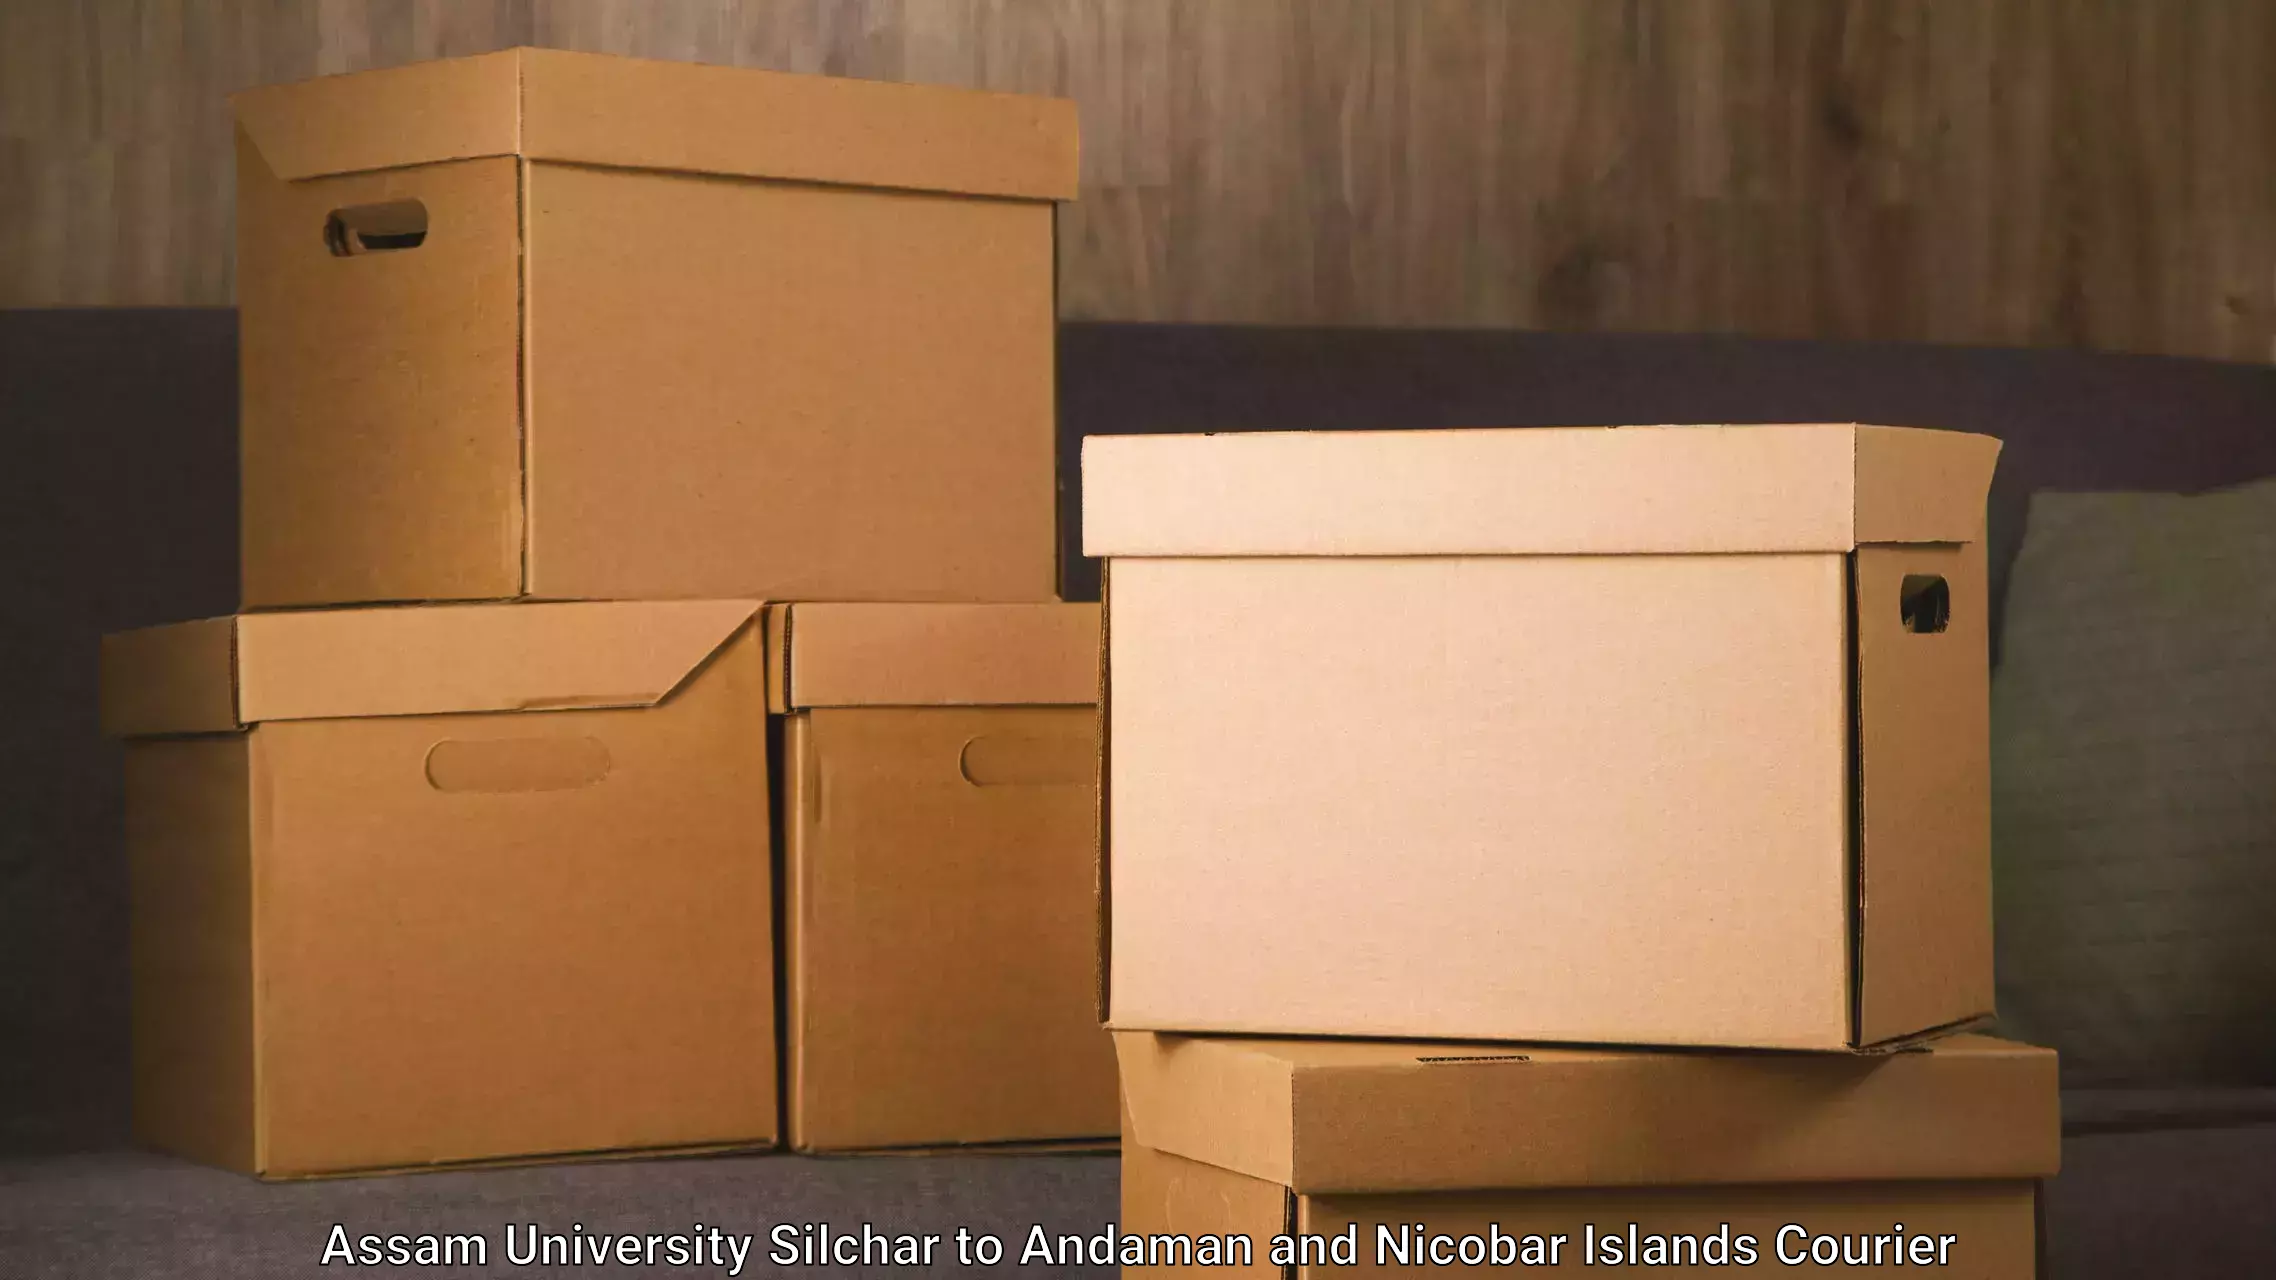 Automated shipping processes Assam University Silchar to Andaman and Nicobar Islands